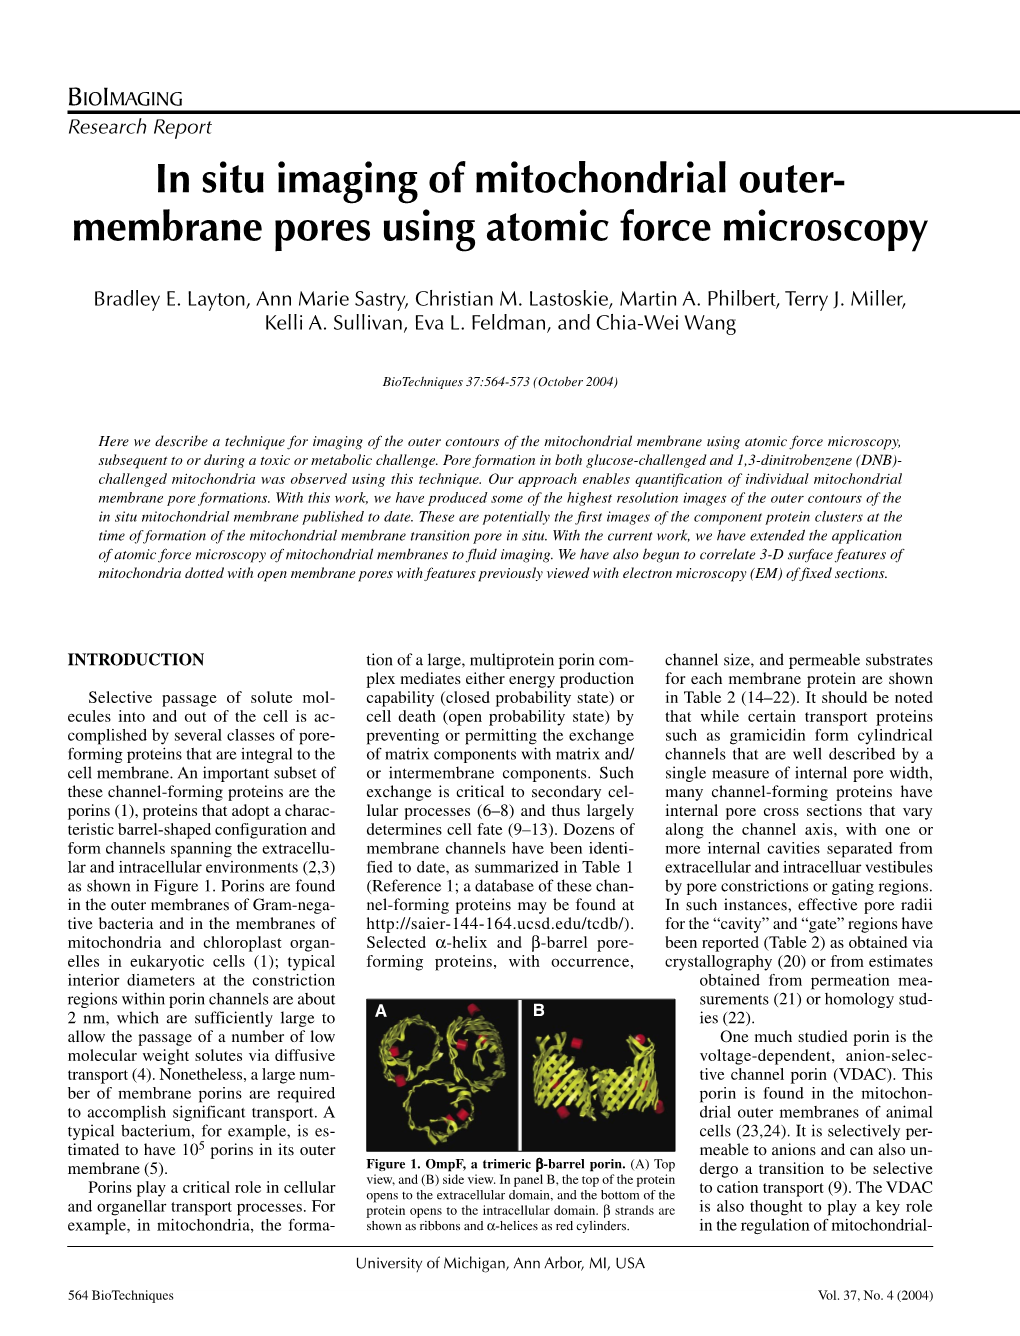 In Situ Imaging of Mitochondrial Outer- Membrane Pores Using Atomic Force Microscopy